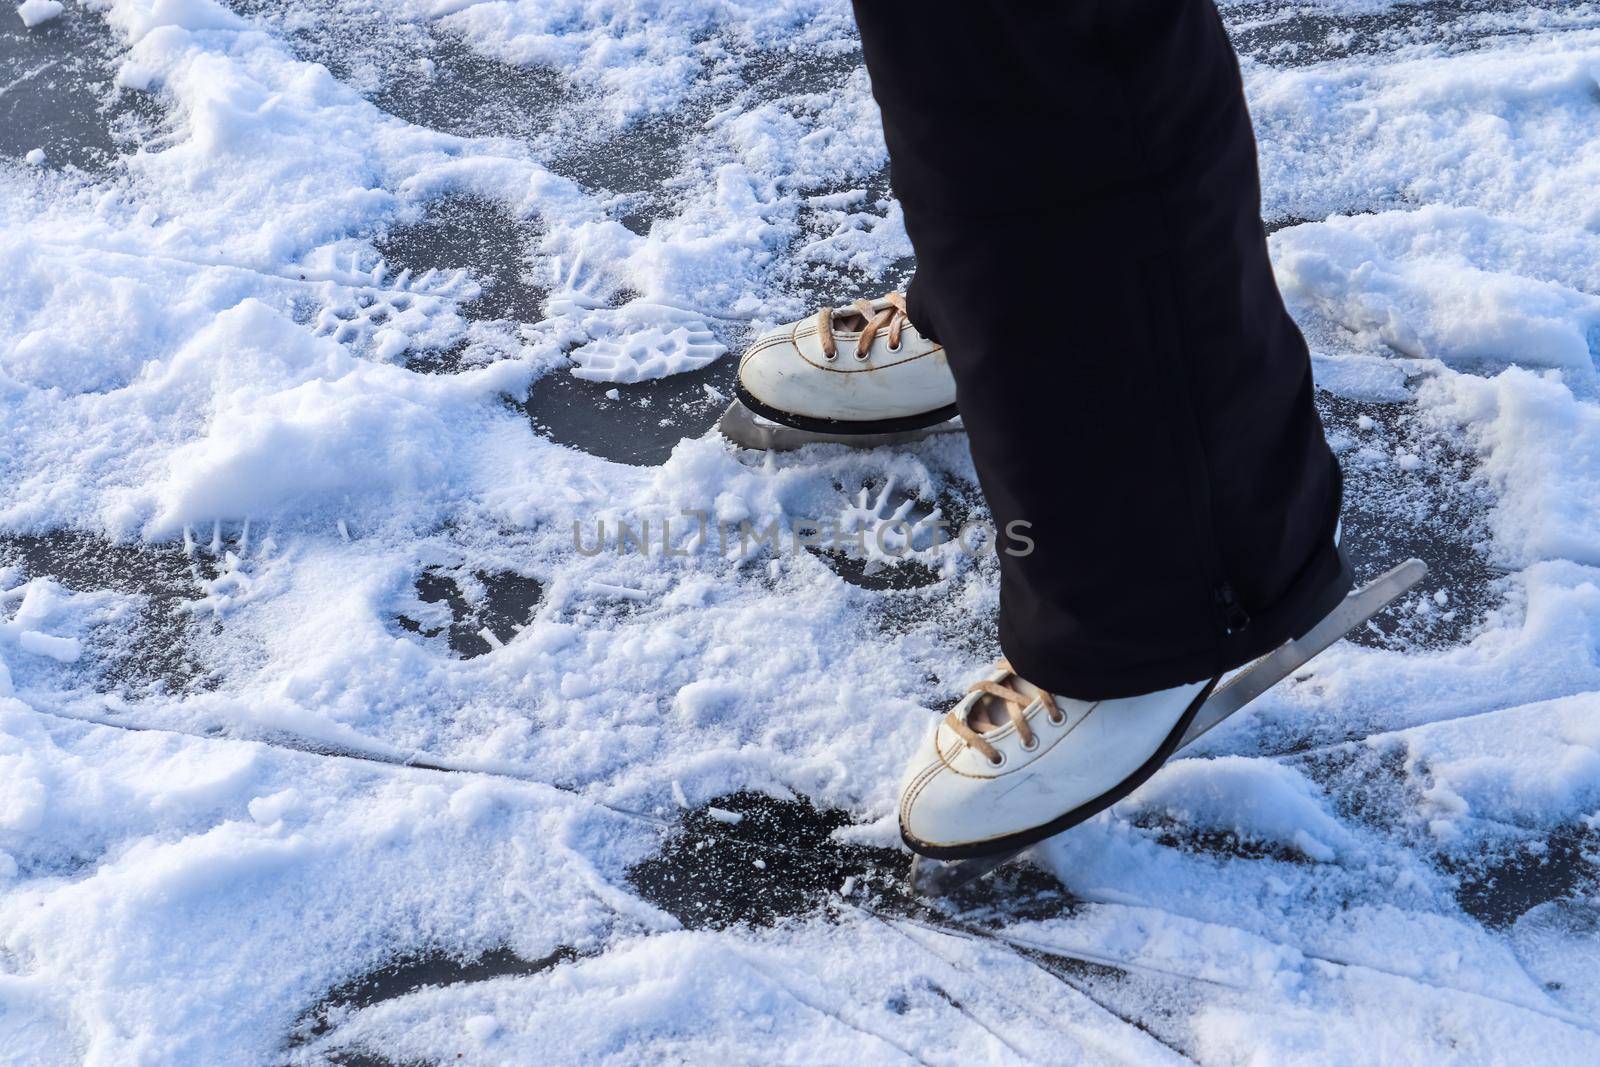 Close up on womans feet wearing ice skating boots and standing on ice. by MP_foto71